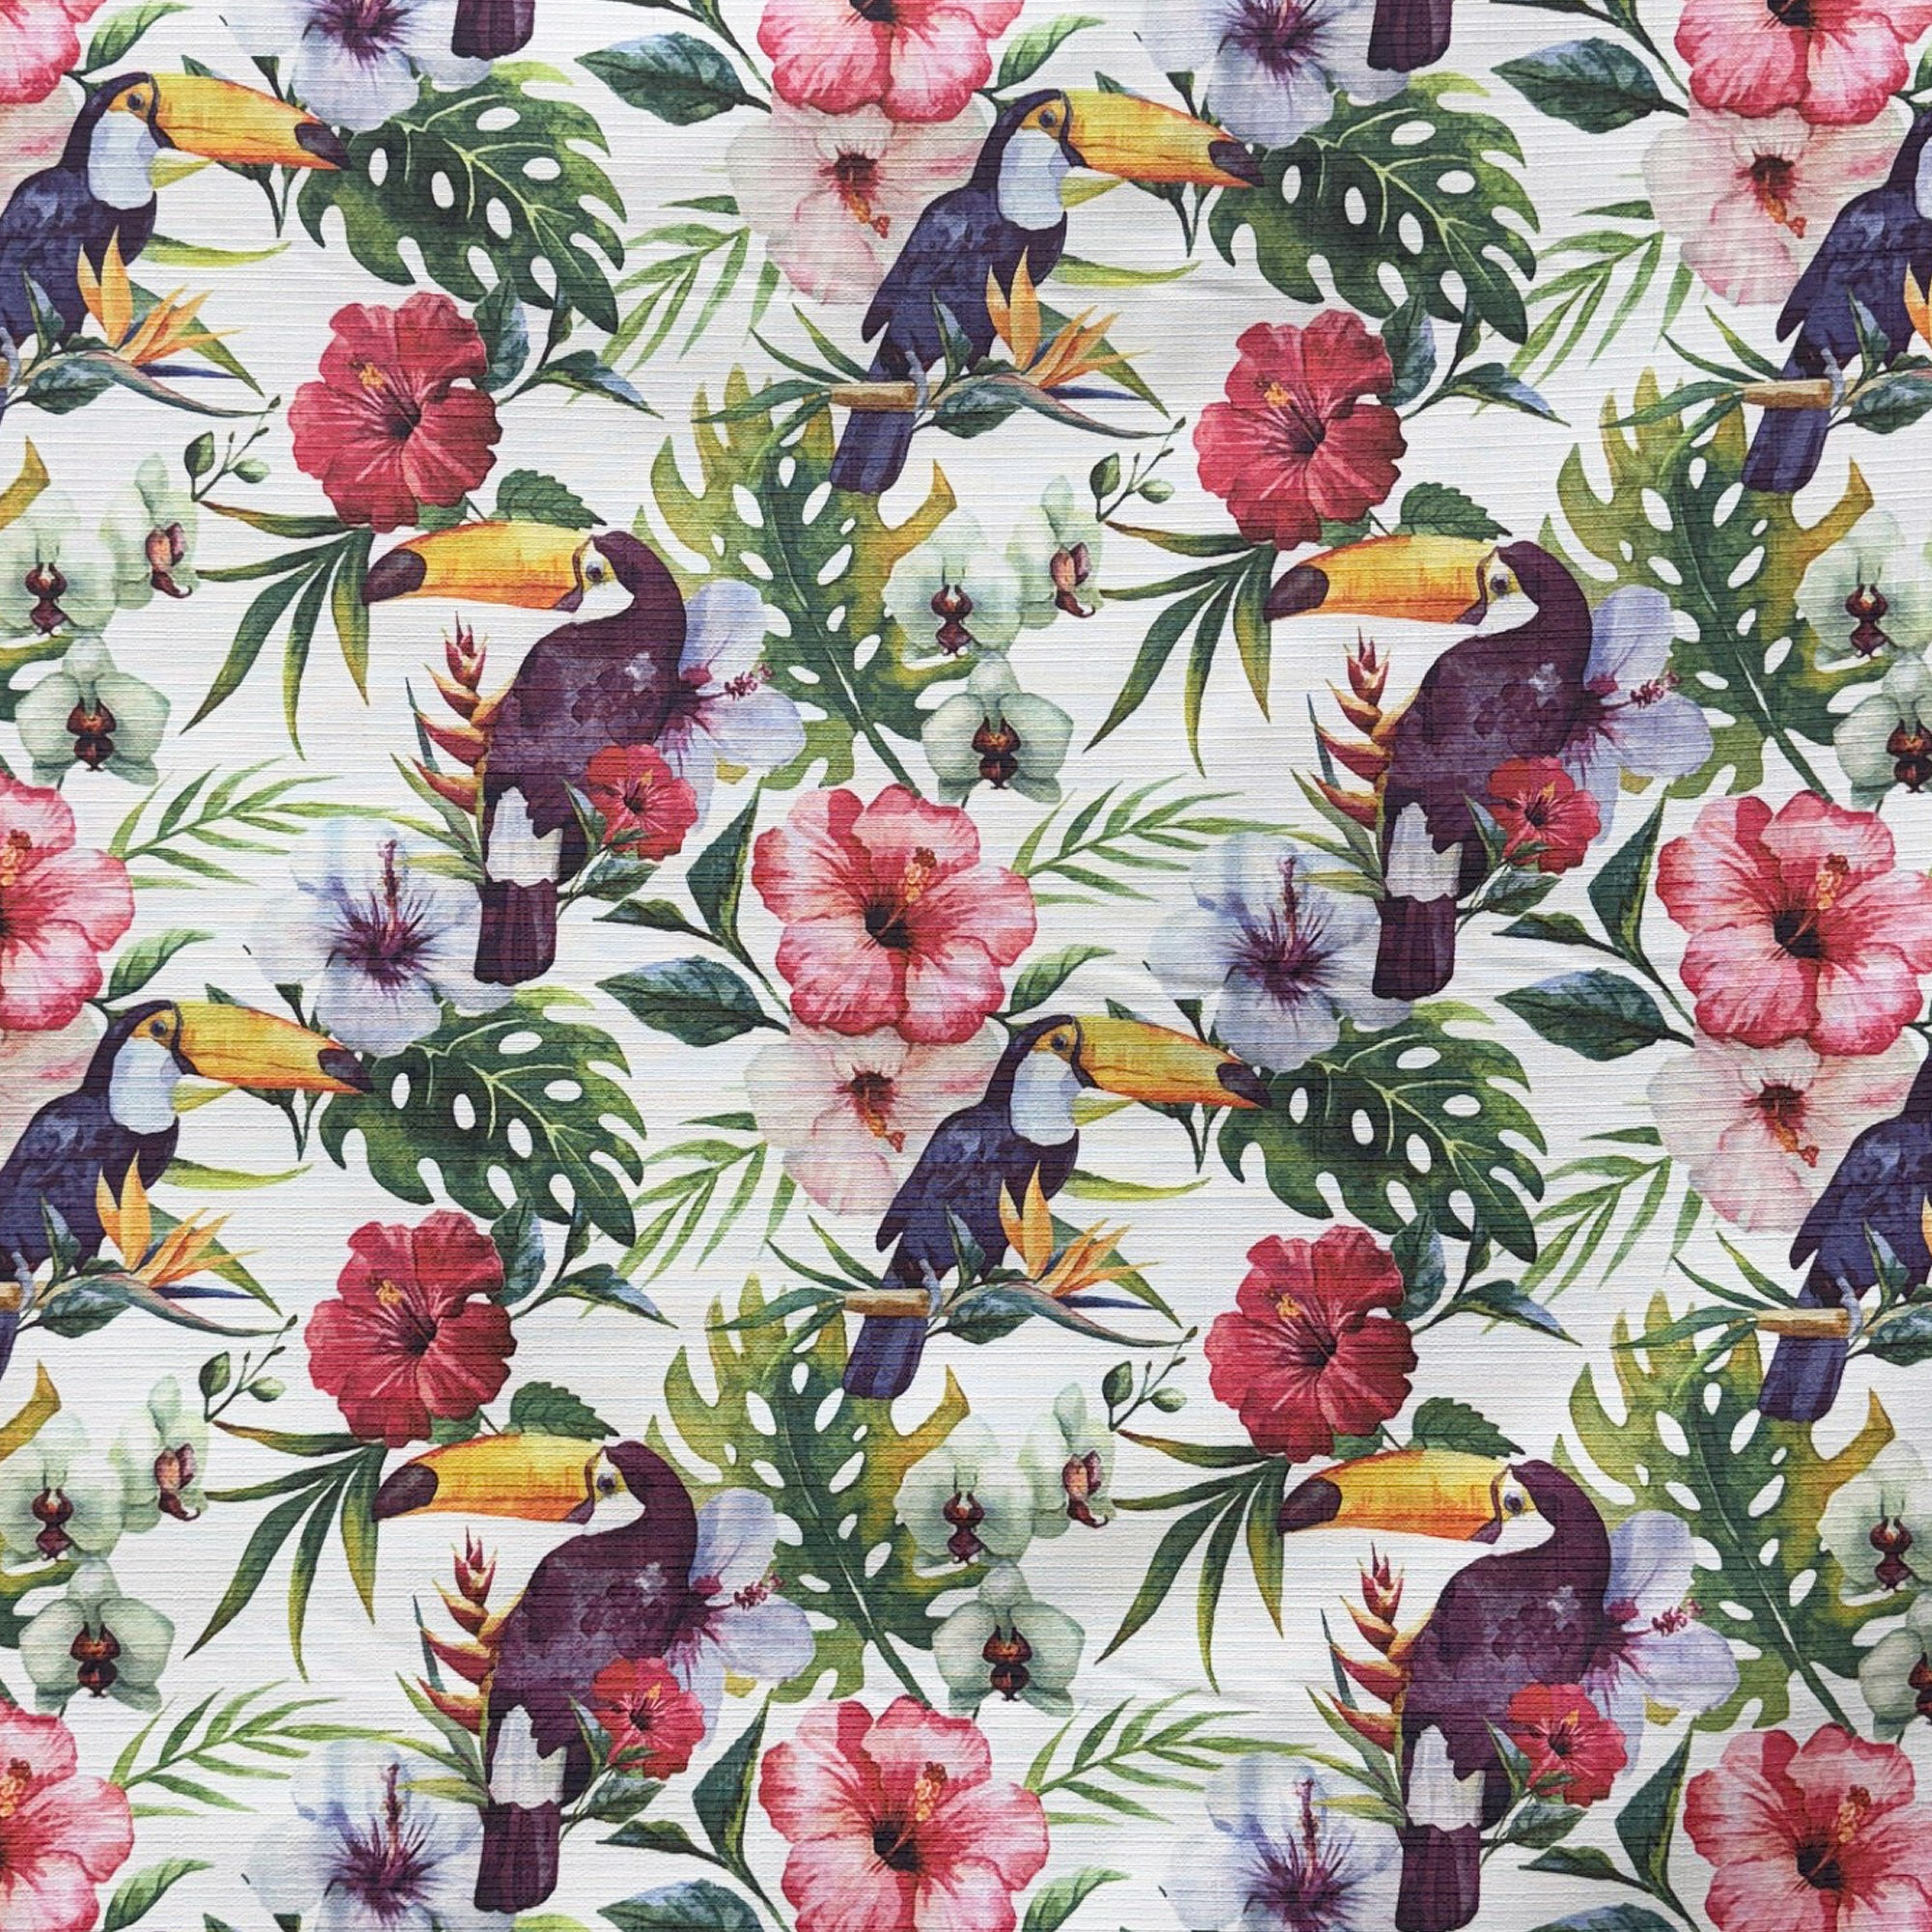 Minorca Fabric | Outdoor Floral Fabric